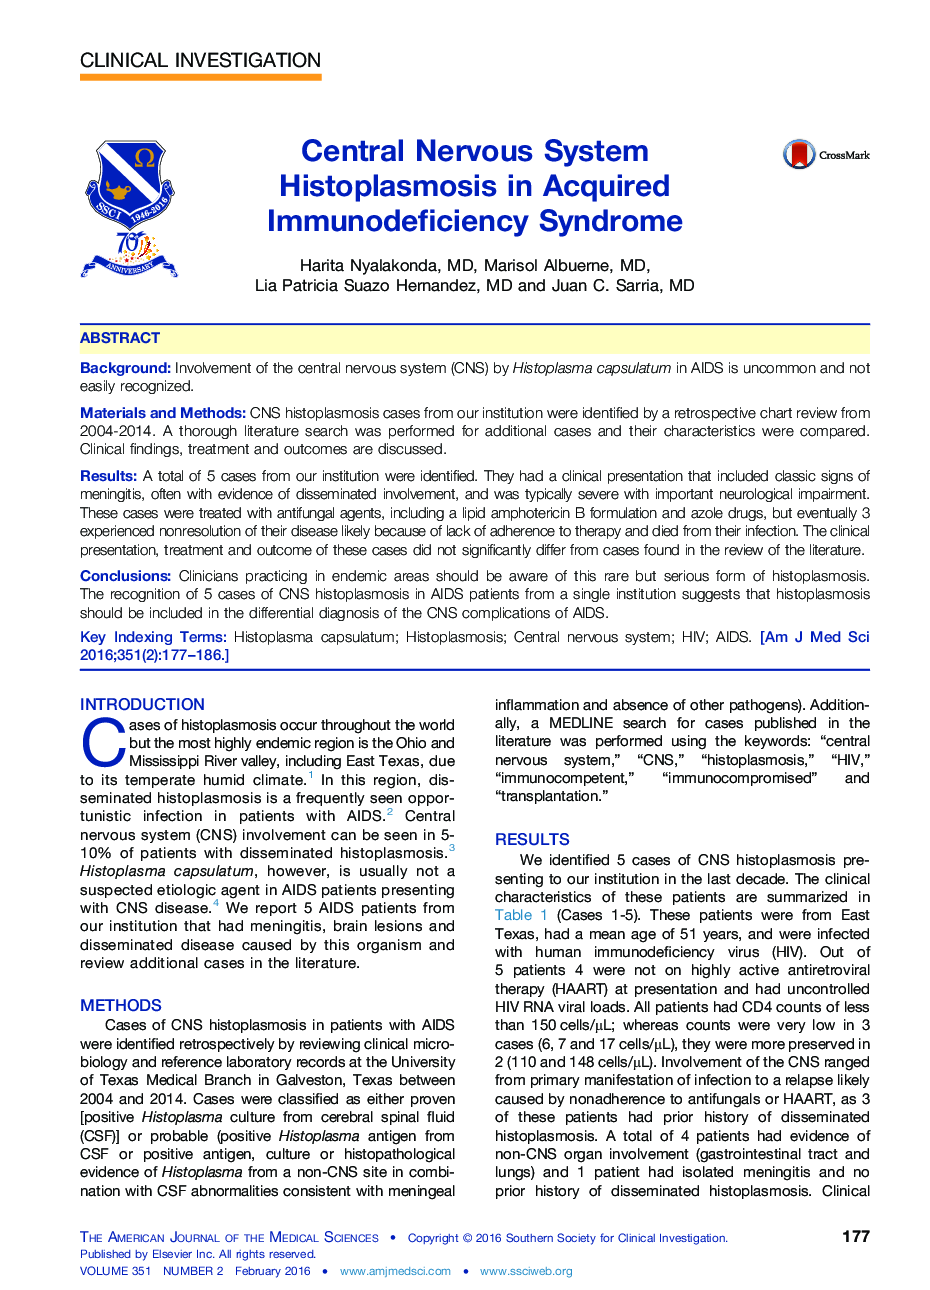 Central Nervous System Histoplasmosis in Acquired Immunodeficiency Syndrome 